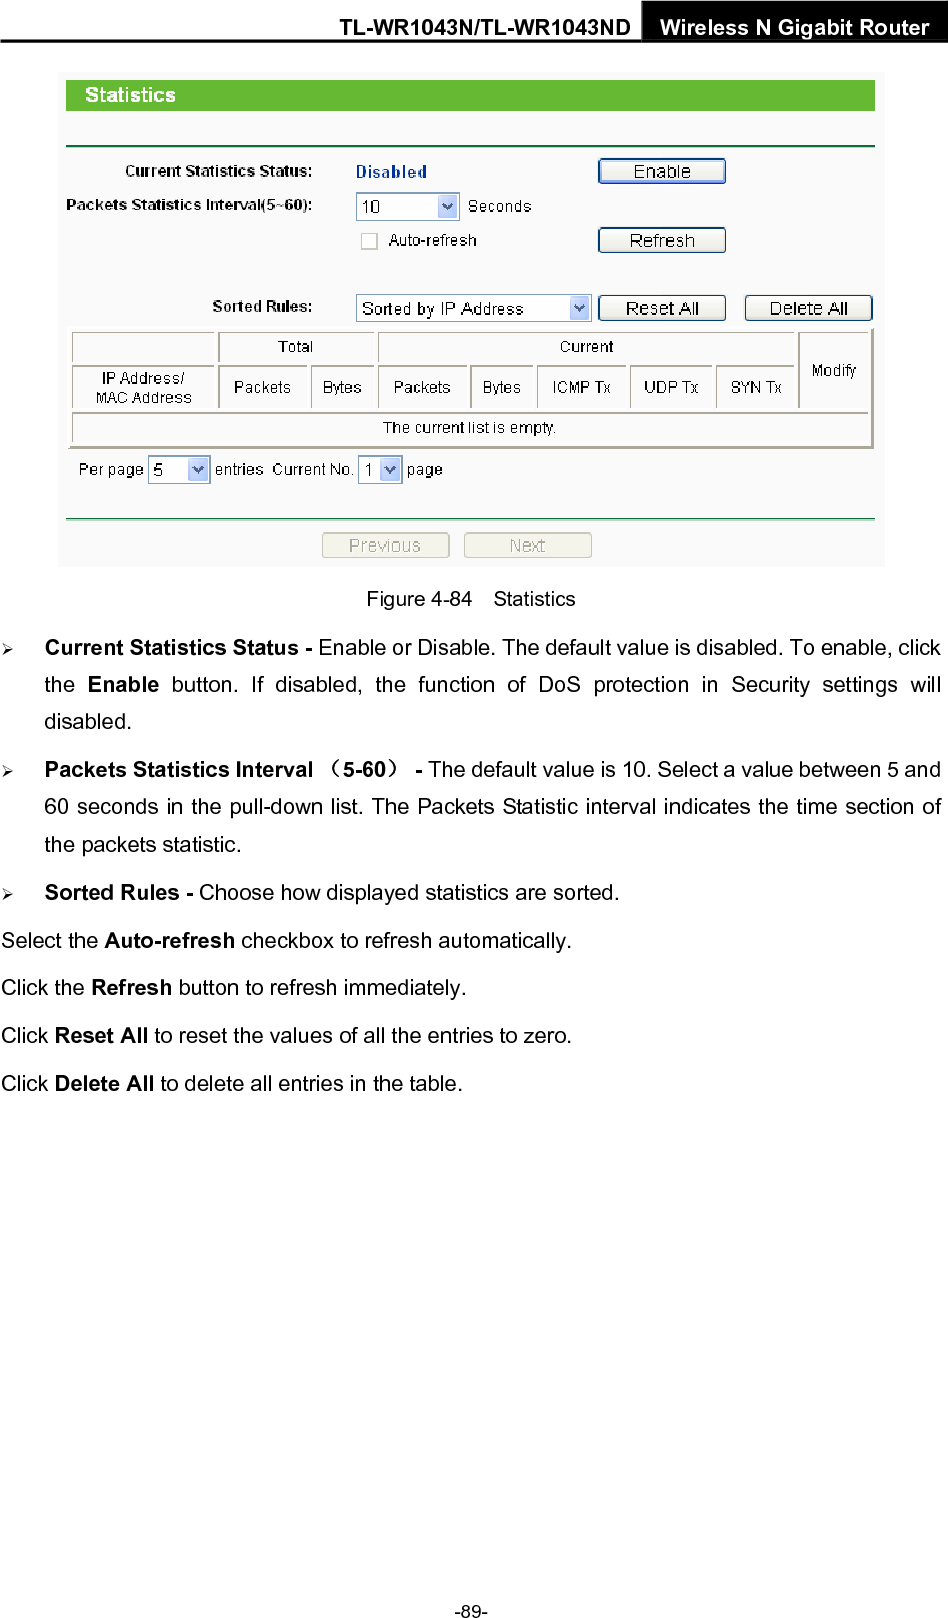 TL-WR1043N/TL-WR1043ND Wireless N Gigabit Router Statistics Table: IP/MAC Address   The IP and MAC address are displayed with related statistics. Packets The total number of packets received and transmitted by the Router. Total Bytes  The total number of bytes received and transmitted by the Router. PacketsThe total number of packets received and transmitted in the last Packets Statistic interval seconds. Bytes The total number of bytes received and transmitted in the last Packets Statistic interval seconds. ICMP TxThe number of the ICMP packets transmitted to WAN per second at the specified Packets Statistics interval. It is shown like “current transmitting rate / Max transmitting rate”. UDP TxThe number of UDP packets transmitted to the WAN per second at the specified Packets Statistics interval. It is shown like “current transmitting rate / Max transmitting rate”. Current TCP SYN Tx The number of TCP SYN packets transmitted to the WAN per second at the specified Packets Statistics interval. It is shown like “current transmitting rate / Max transmitting rate”. Reset  Reset the value of he entry to zero. Modify Delete  Delete the existing entry in the table. There would be 5 entries on each page. Click Previous to return to the previous page and Next to the next page. -90- 